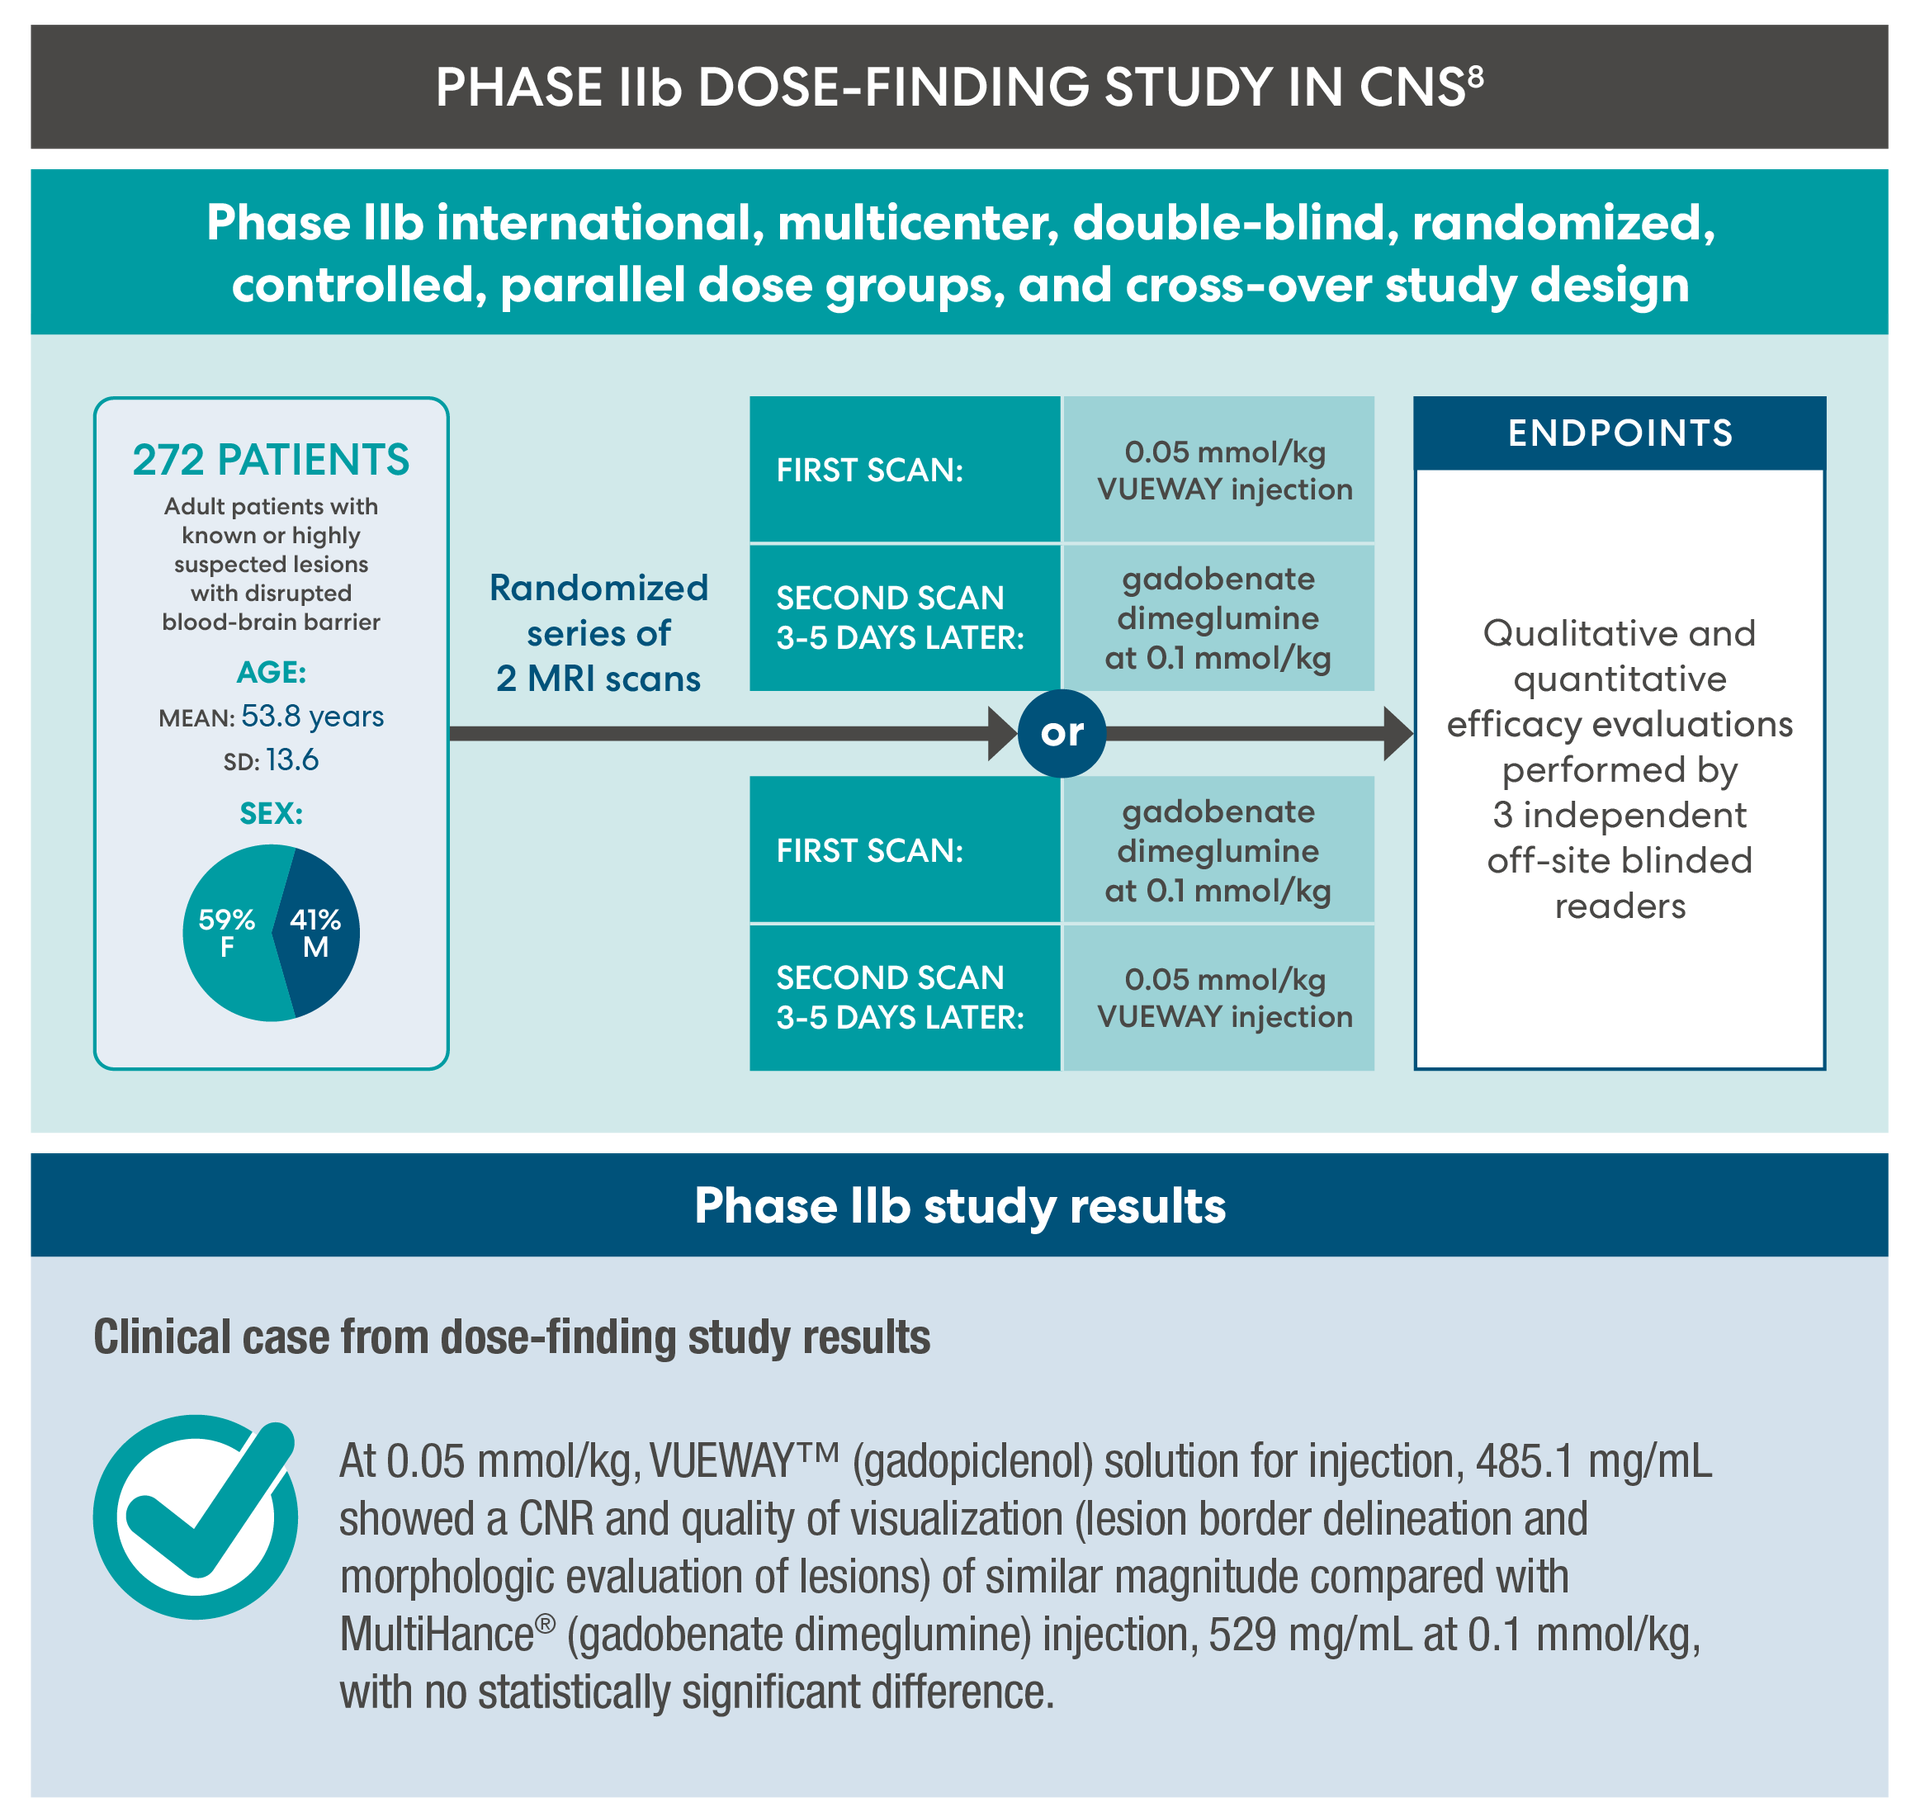 phase 2b dose-finding study